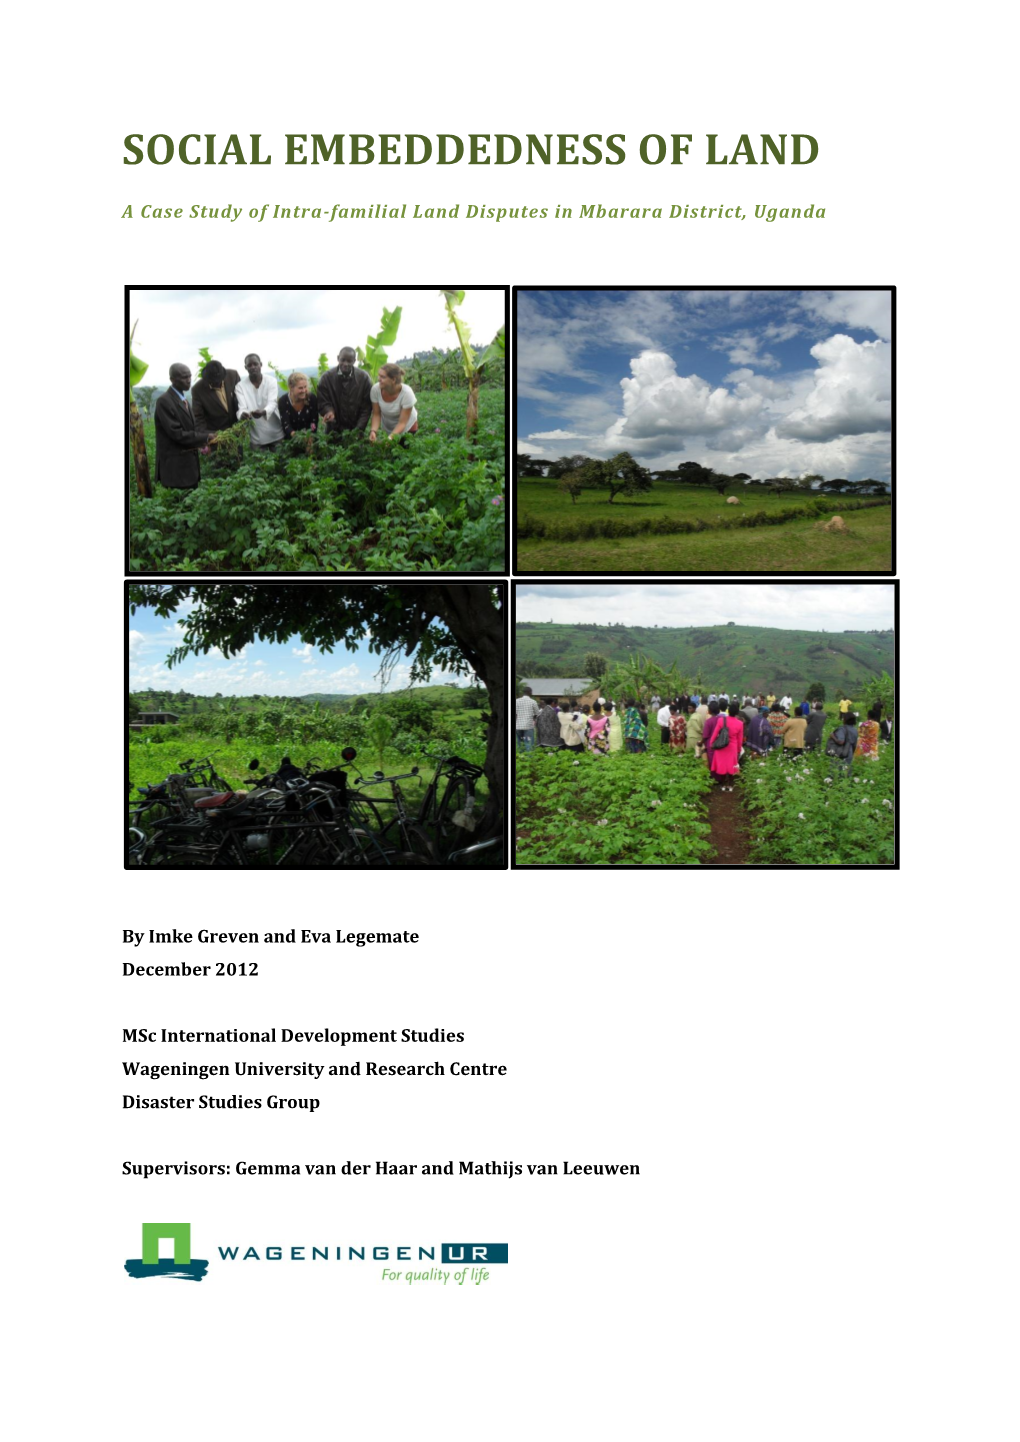 A Case Study of Intra-Familial Land Disputes in Mbarara District, Uganda